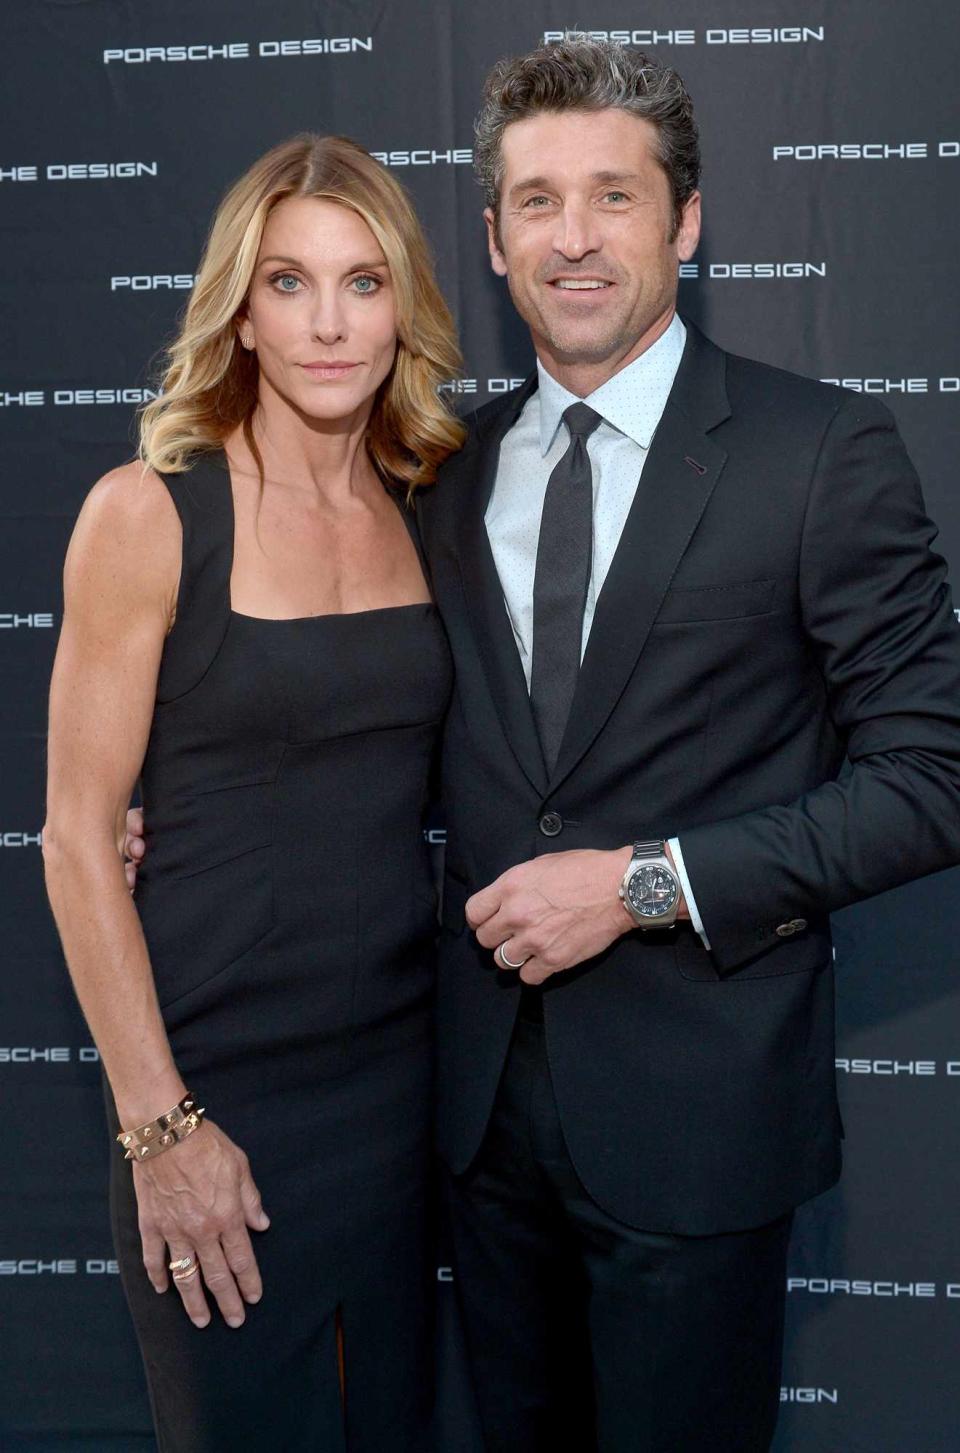 Patrick Dempsey (R) and makeup artist Jillian Dempsey attend the Porsche Design Celebrates Festival of Watches on September 14, 2014 in Beverly Hills, California